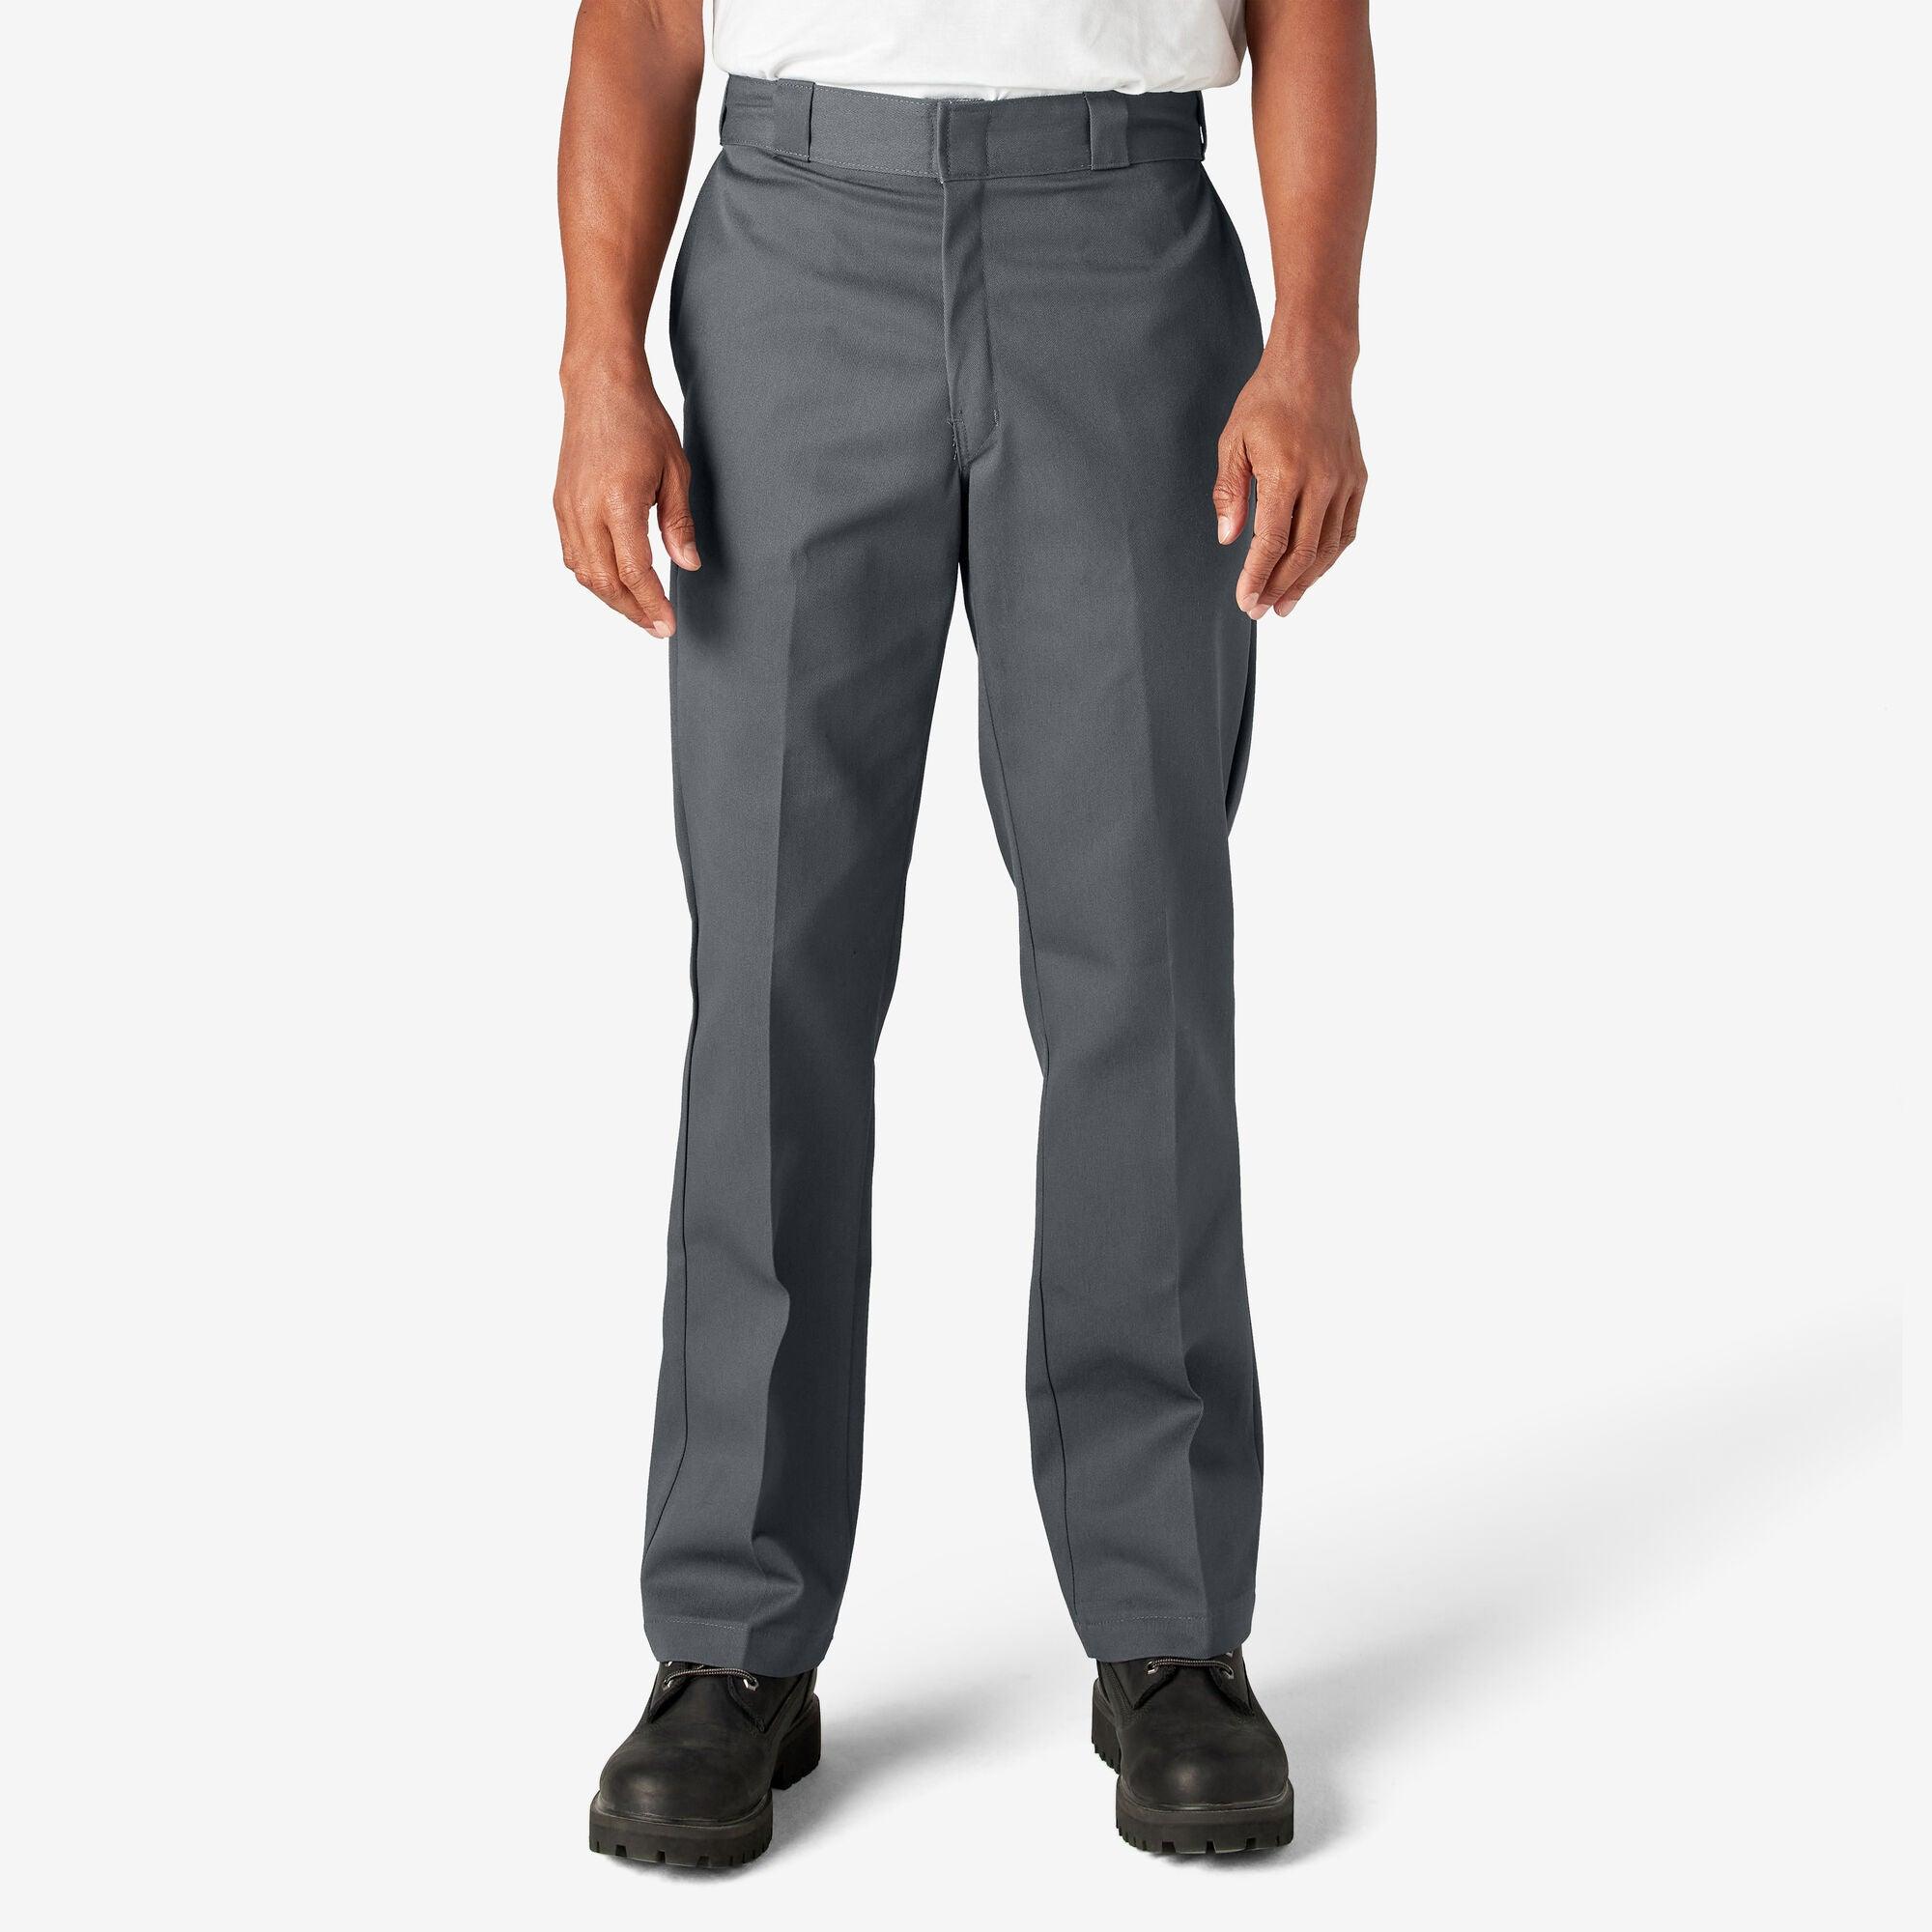 Original 874® Work Pants, Charcoal Gray - Purpose-Built / Home of the Trades